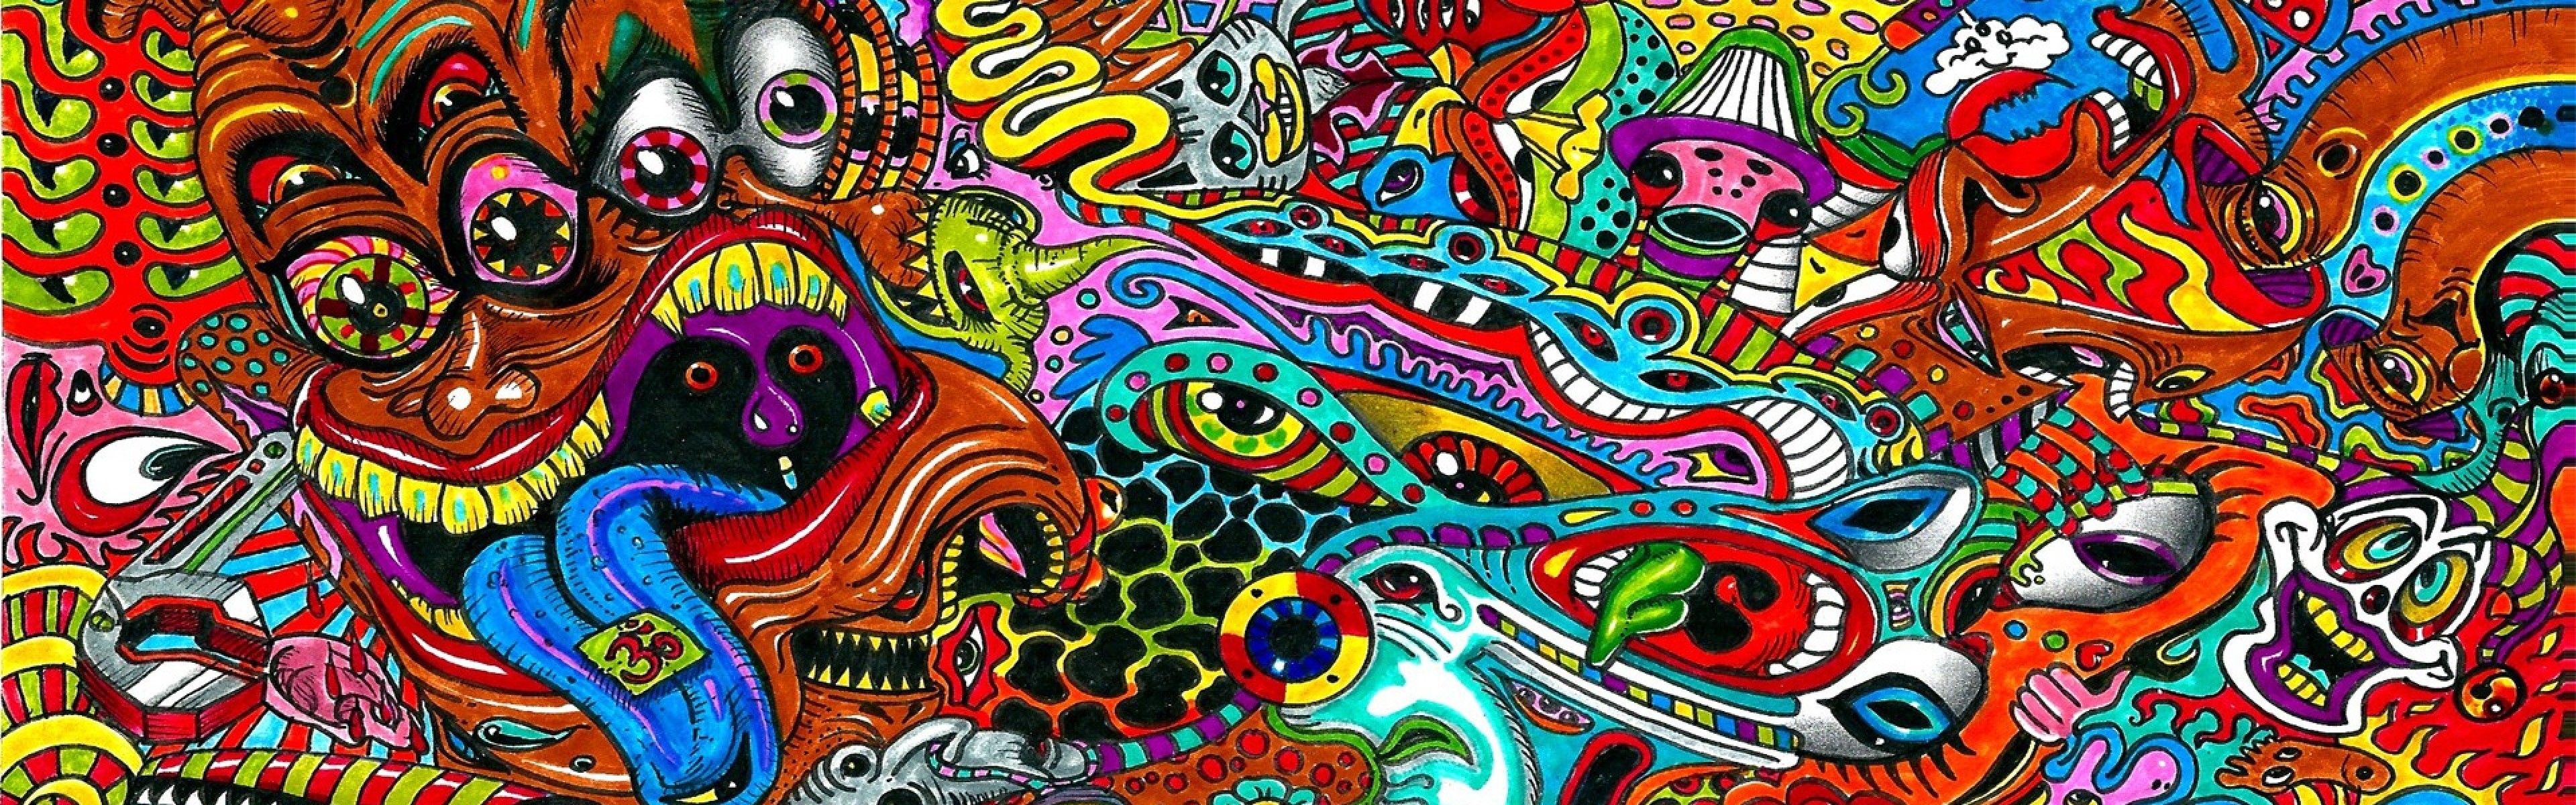 3840x1200 Download Wallpaper  Drawing, Surreal, Colorful, Psychedelic .